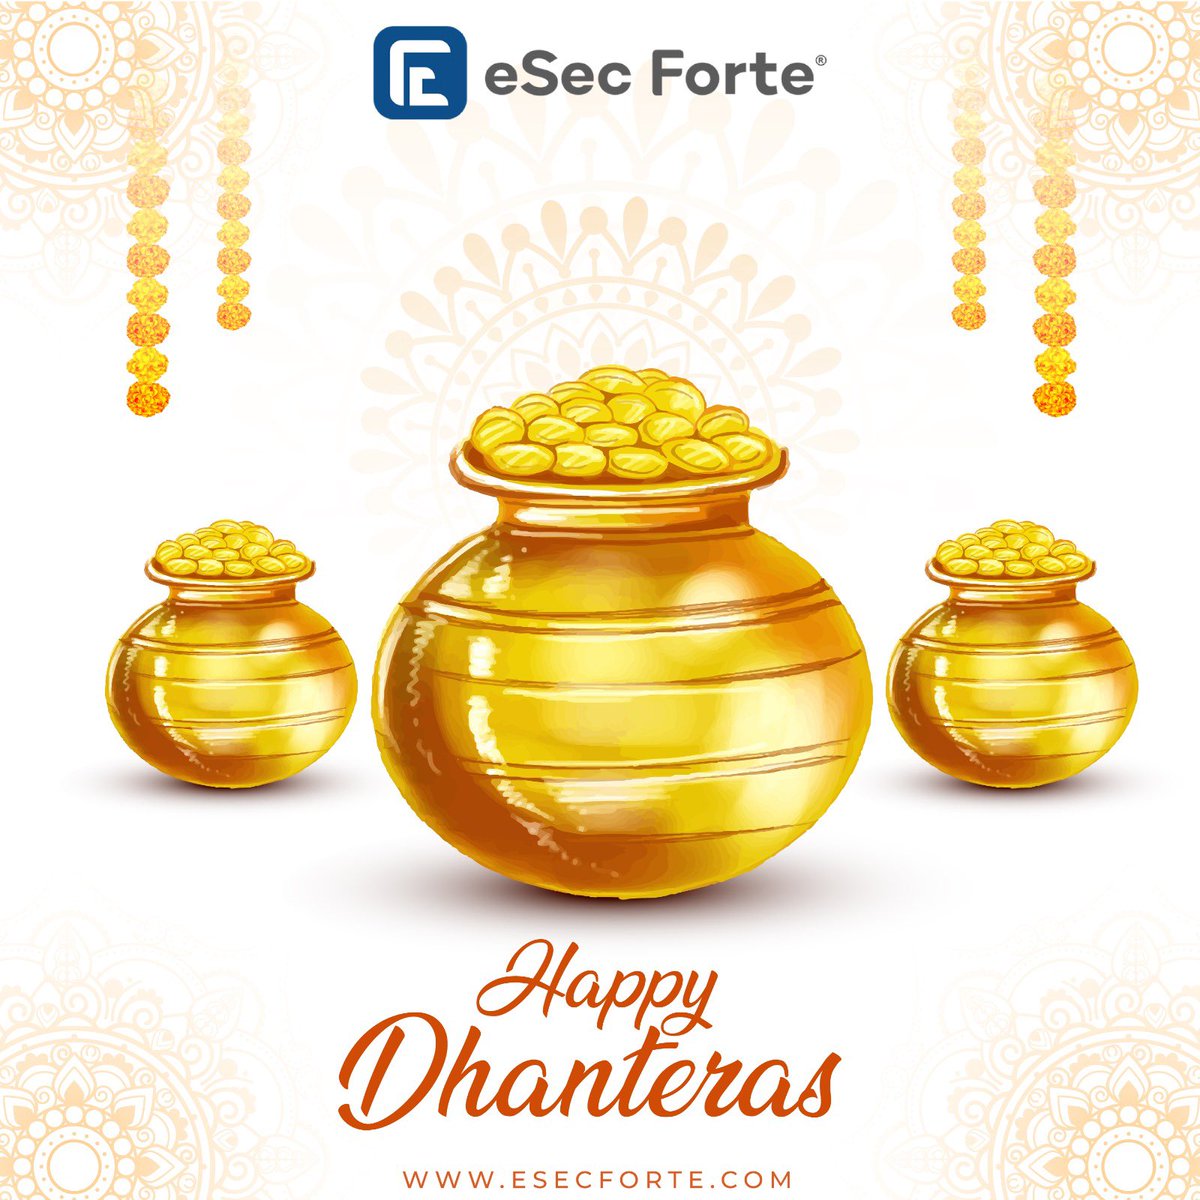 Dhanteras is a reminder to be grateful for the wealth we have and to share it with those in need. Happy Dhanteras! . . . #esecforte #dhanteras #Cybersecurity #dfir #digitalforensics #esecfortians